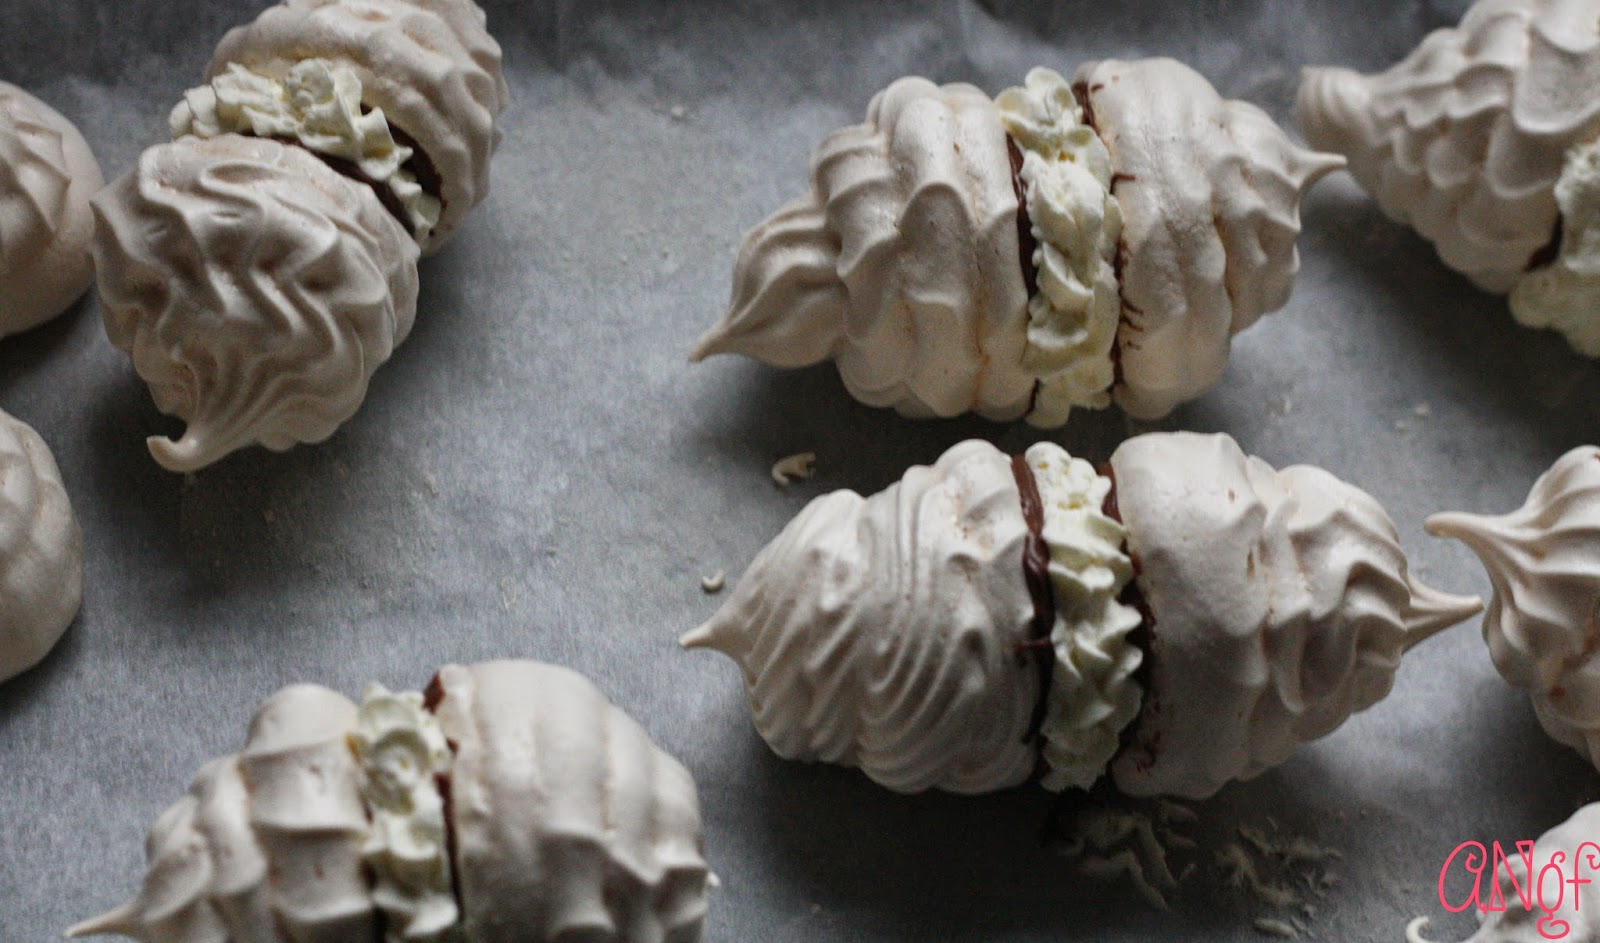 Overview of gluten free meringue kisses from Anyonita-nibbles.co.uk